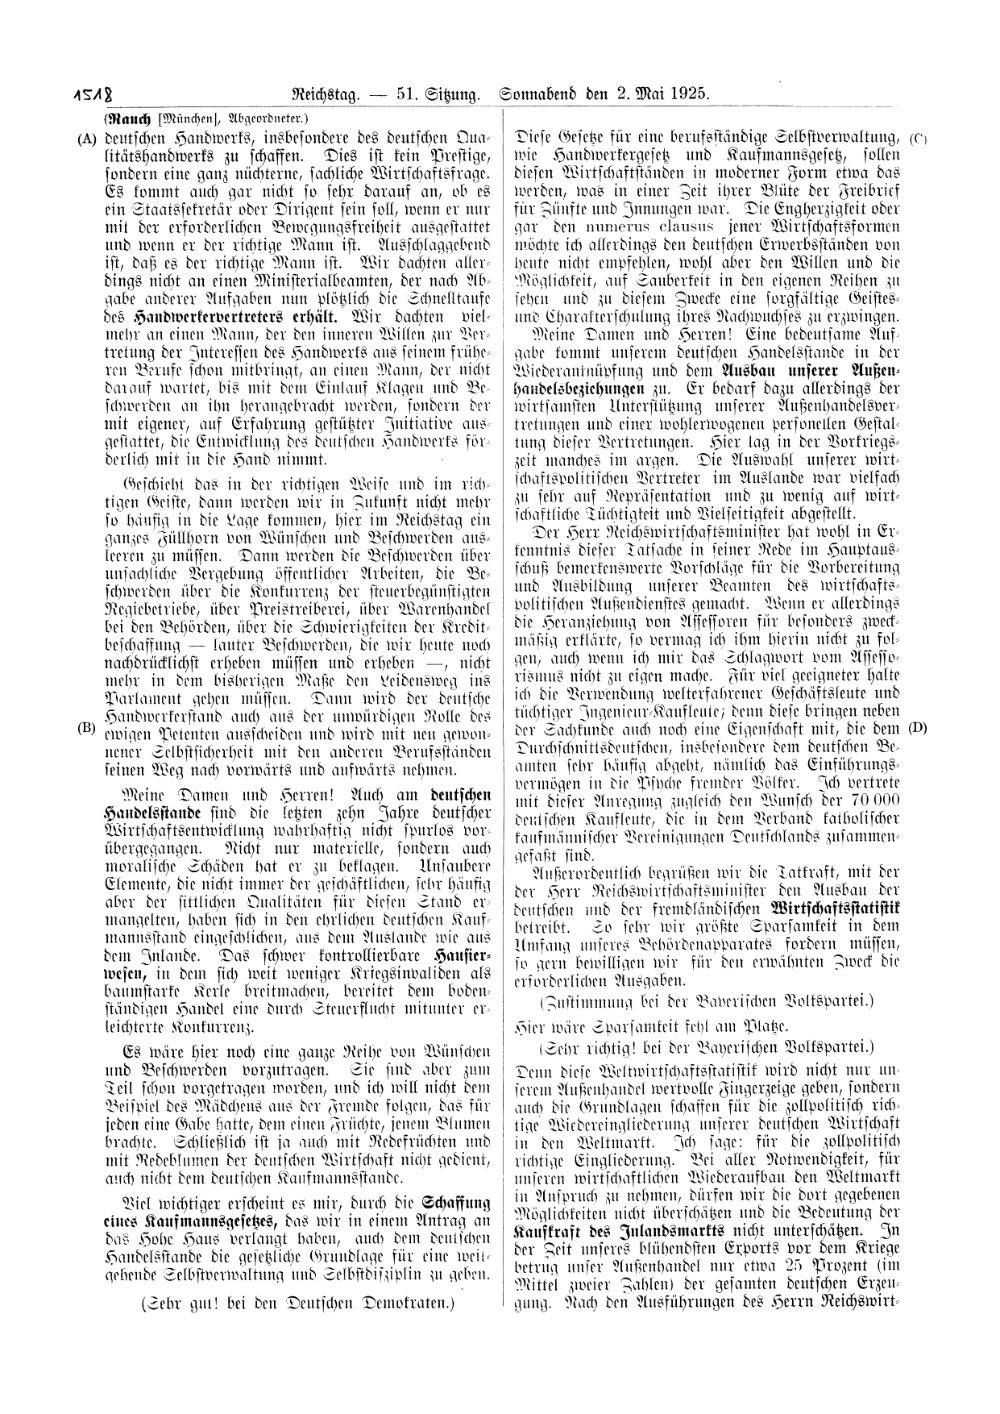 Scan of page 1518